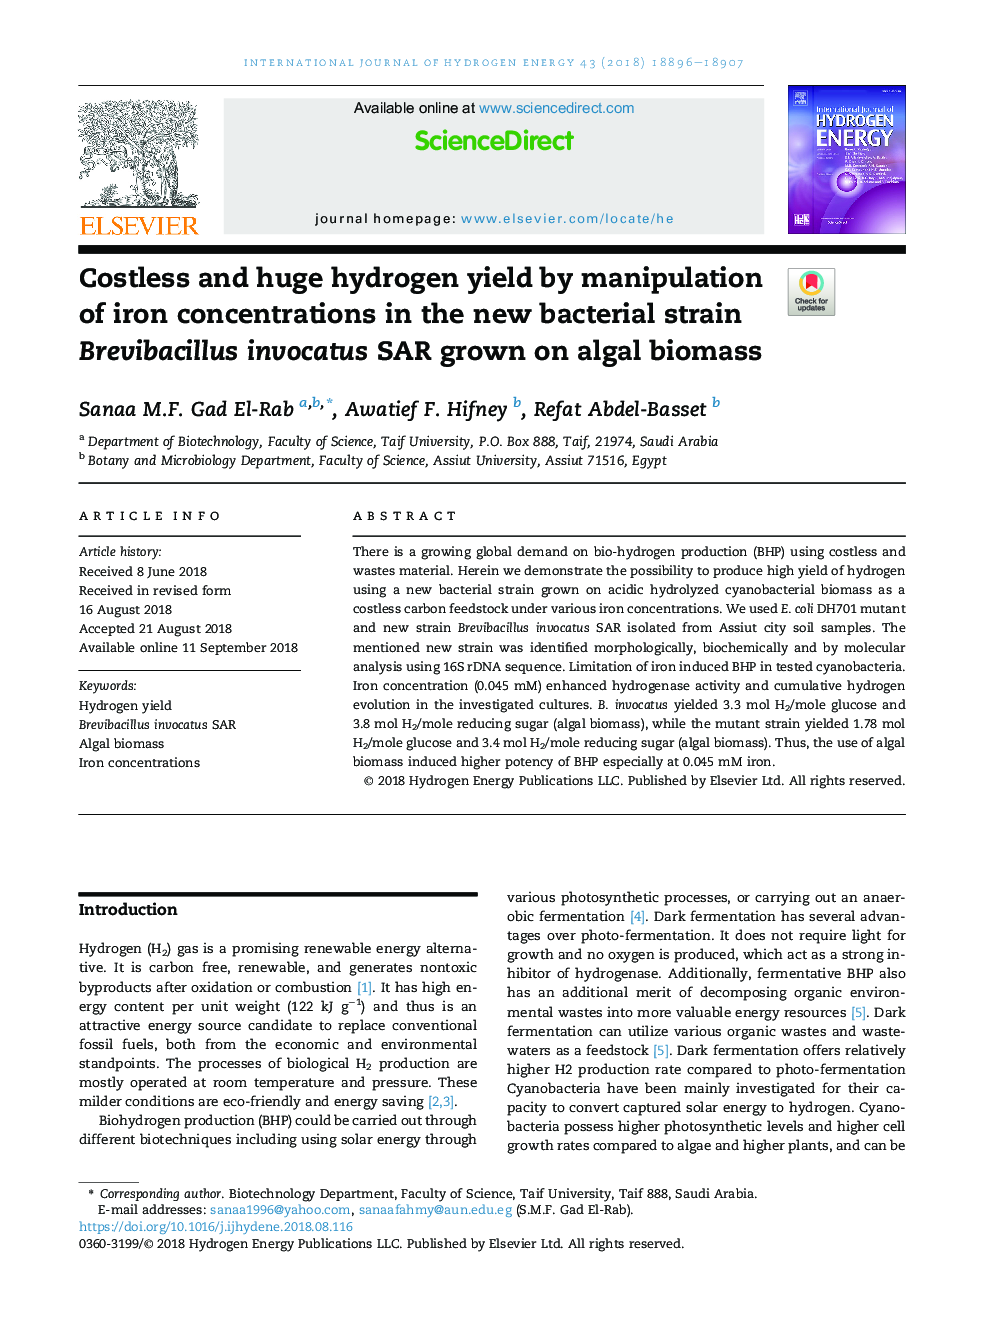 Costless and huge hydrogen yield by manipulation of iron concentrations in the new bacterial strain Brevibacillus invocatus SAR grown on algal biomass